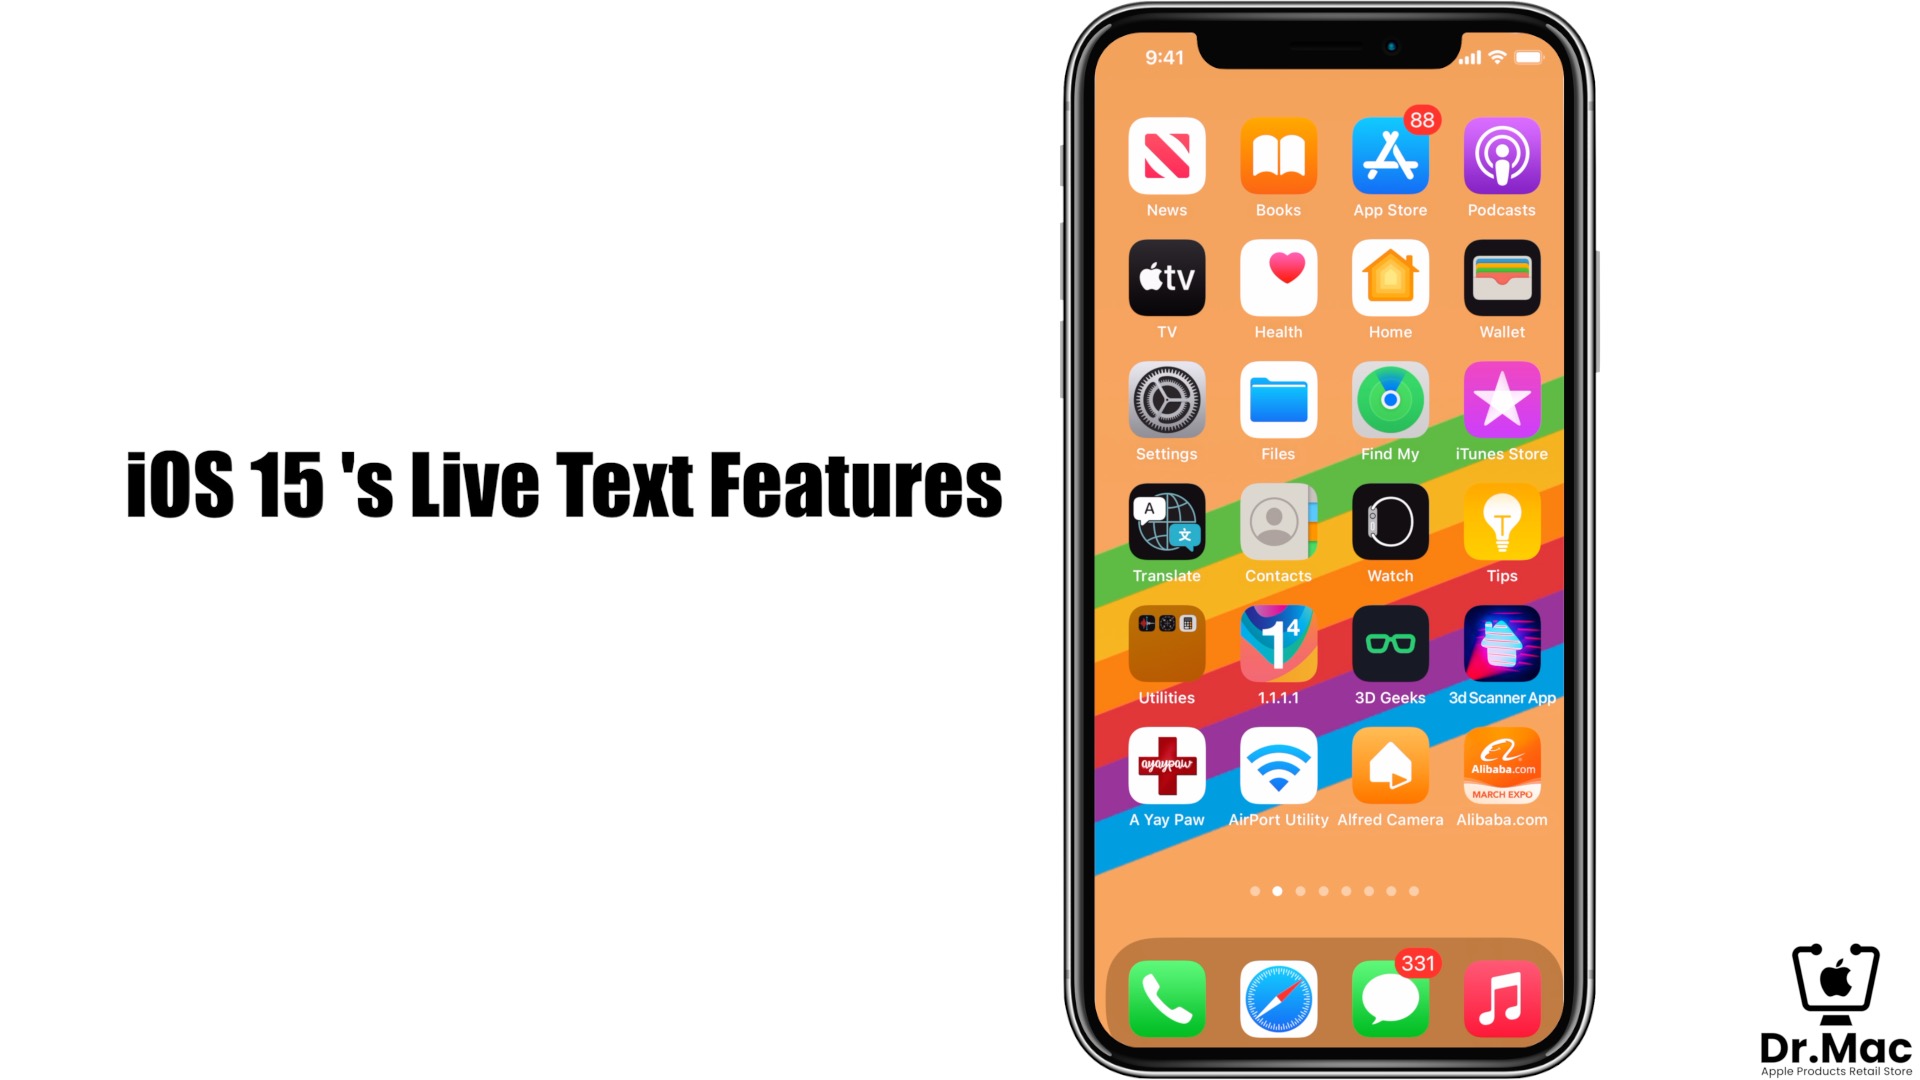 Live Text Features